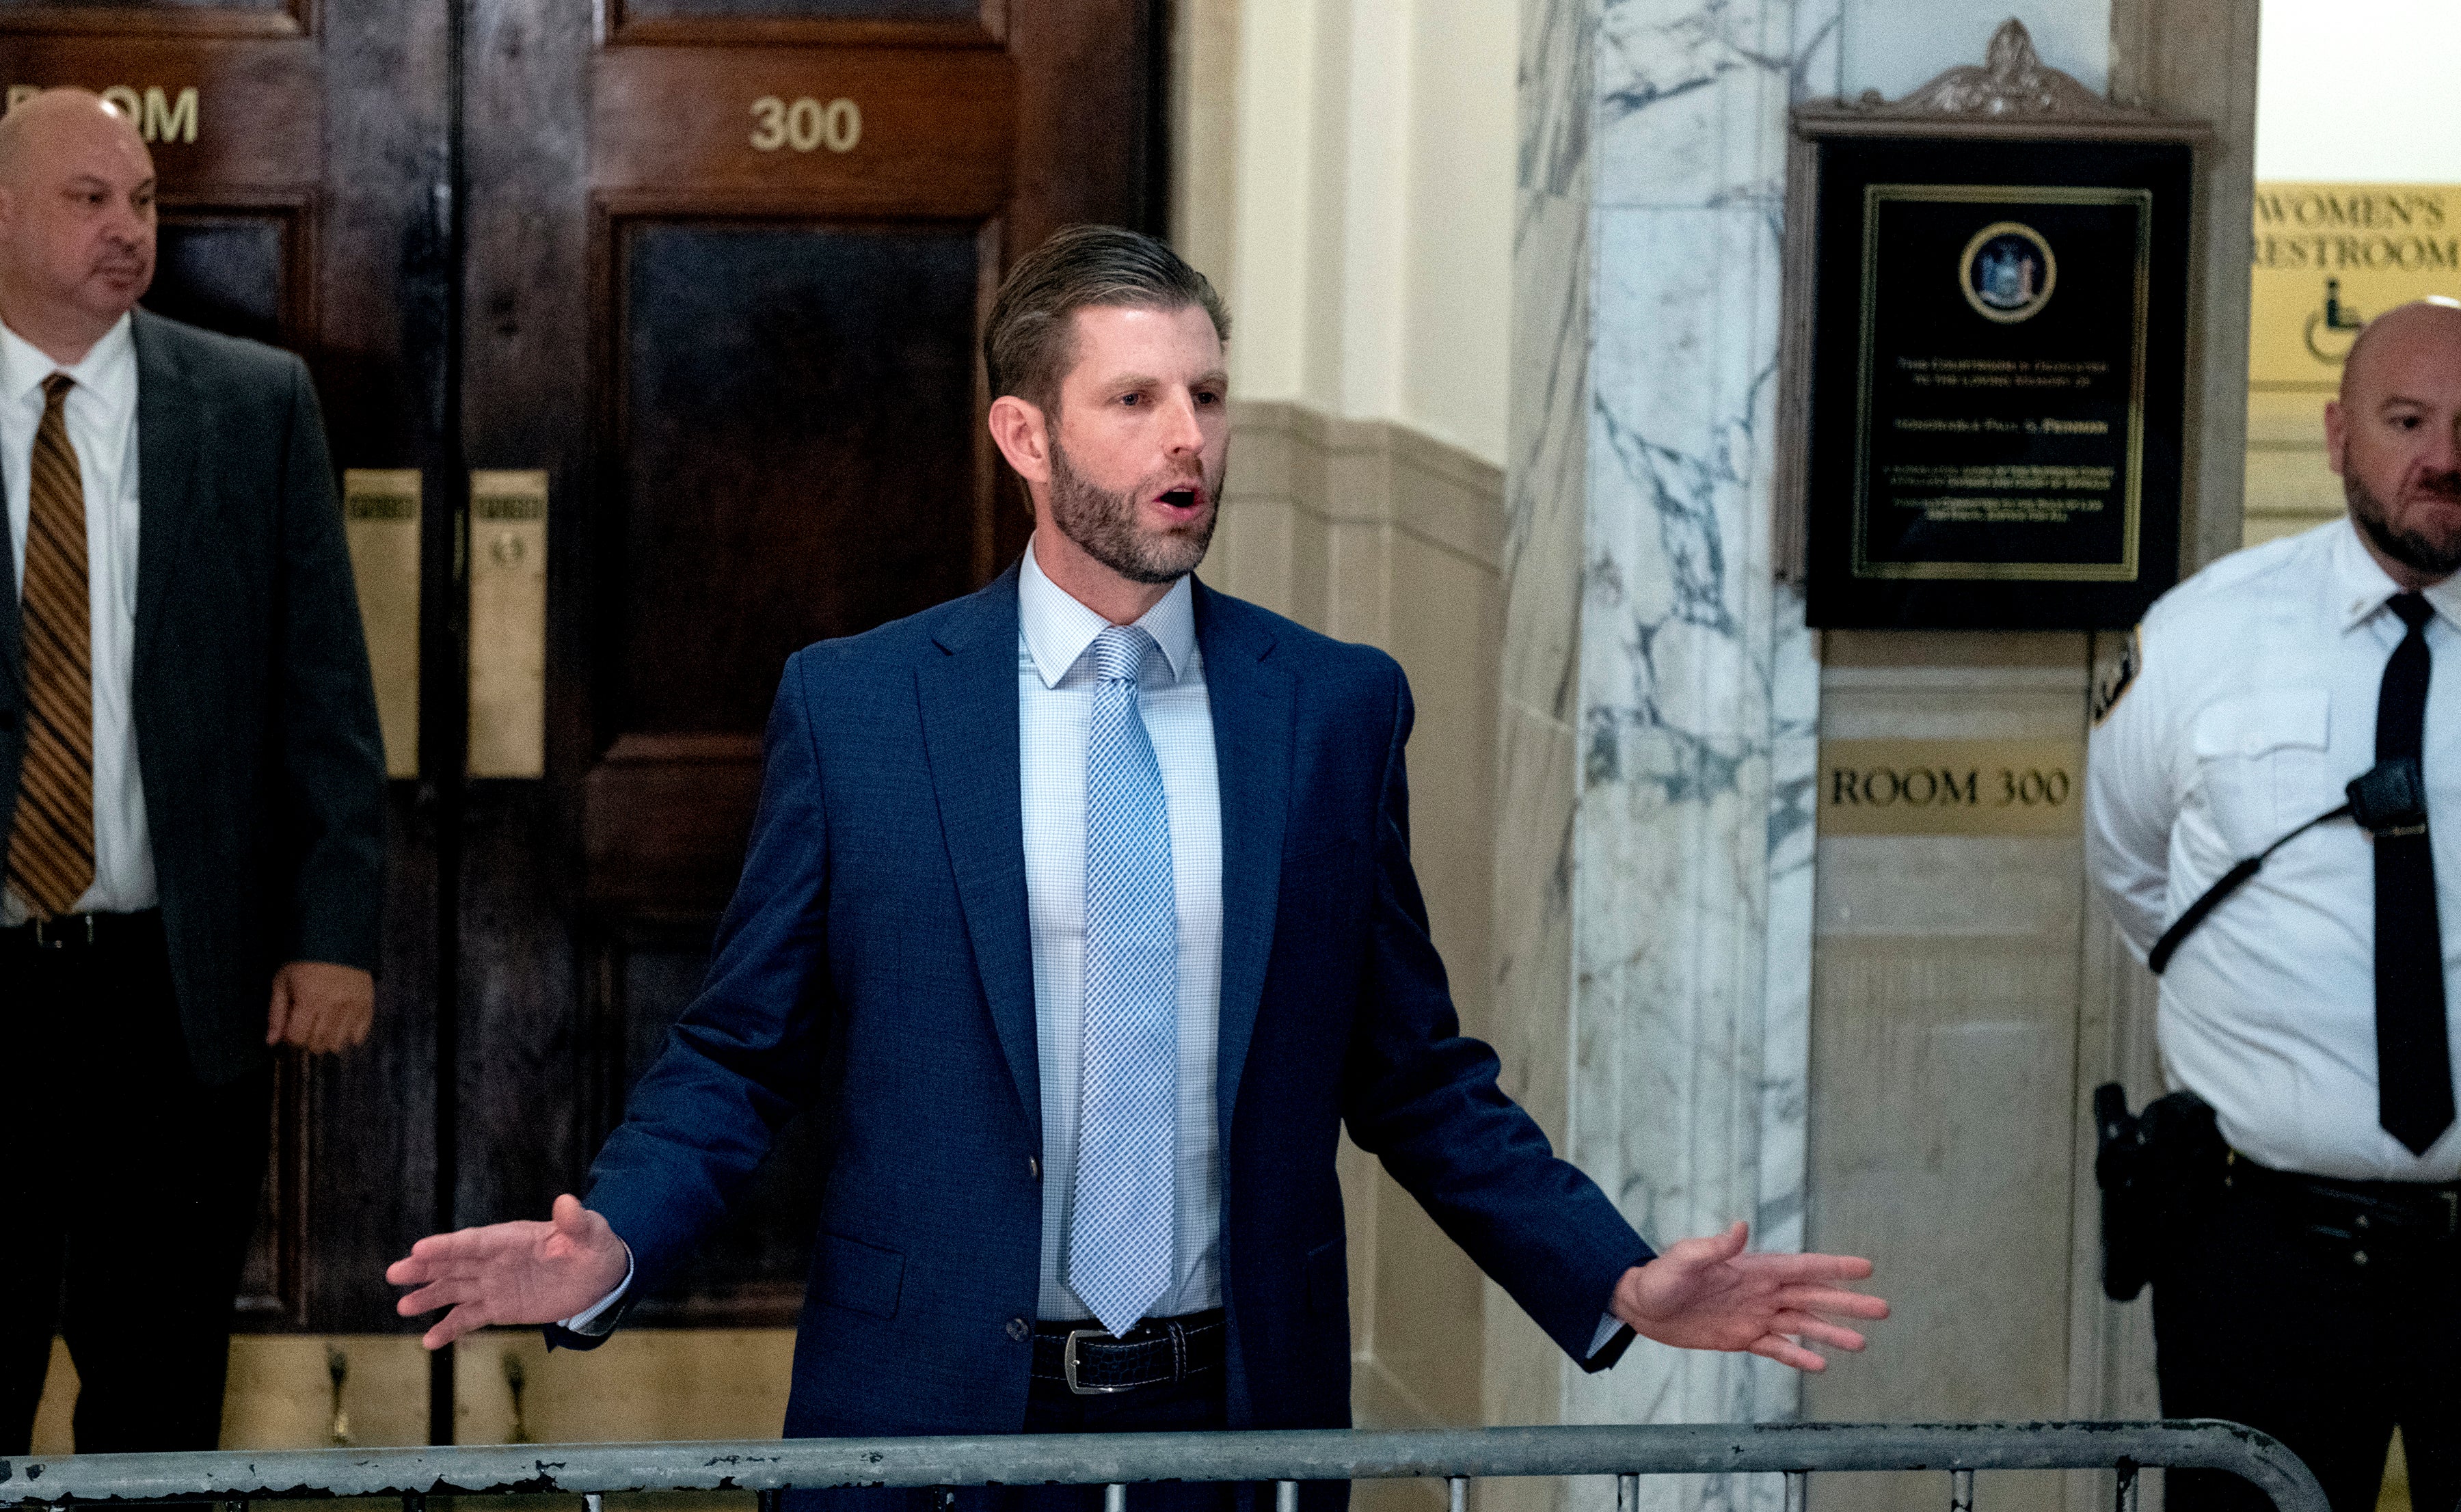 Eric Trump speaks to reporters after his final day of testimony in Judge Arthur Engoron’s courtroom on 3 November.